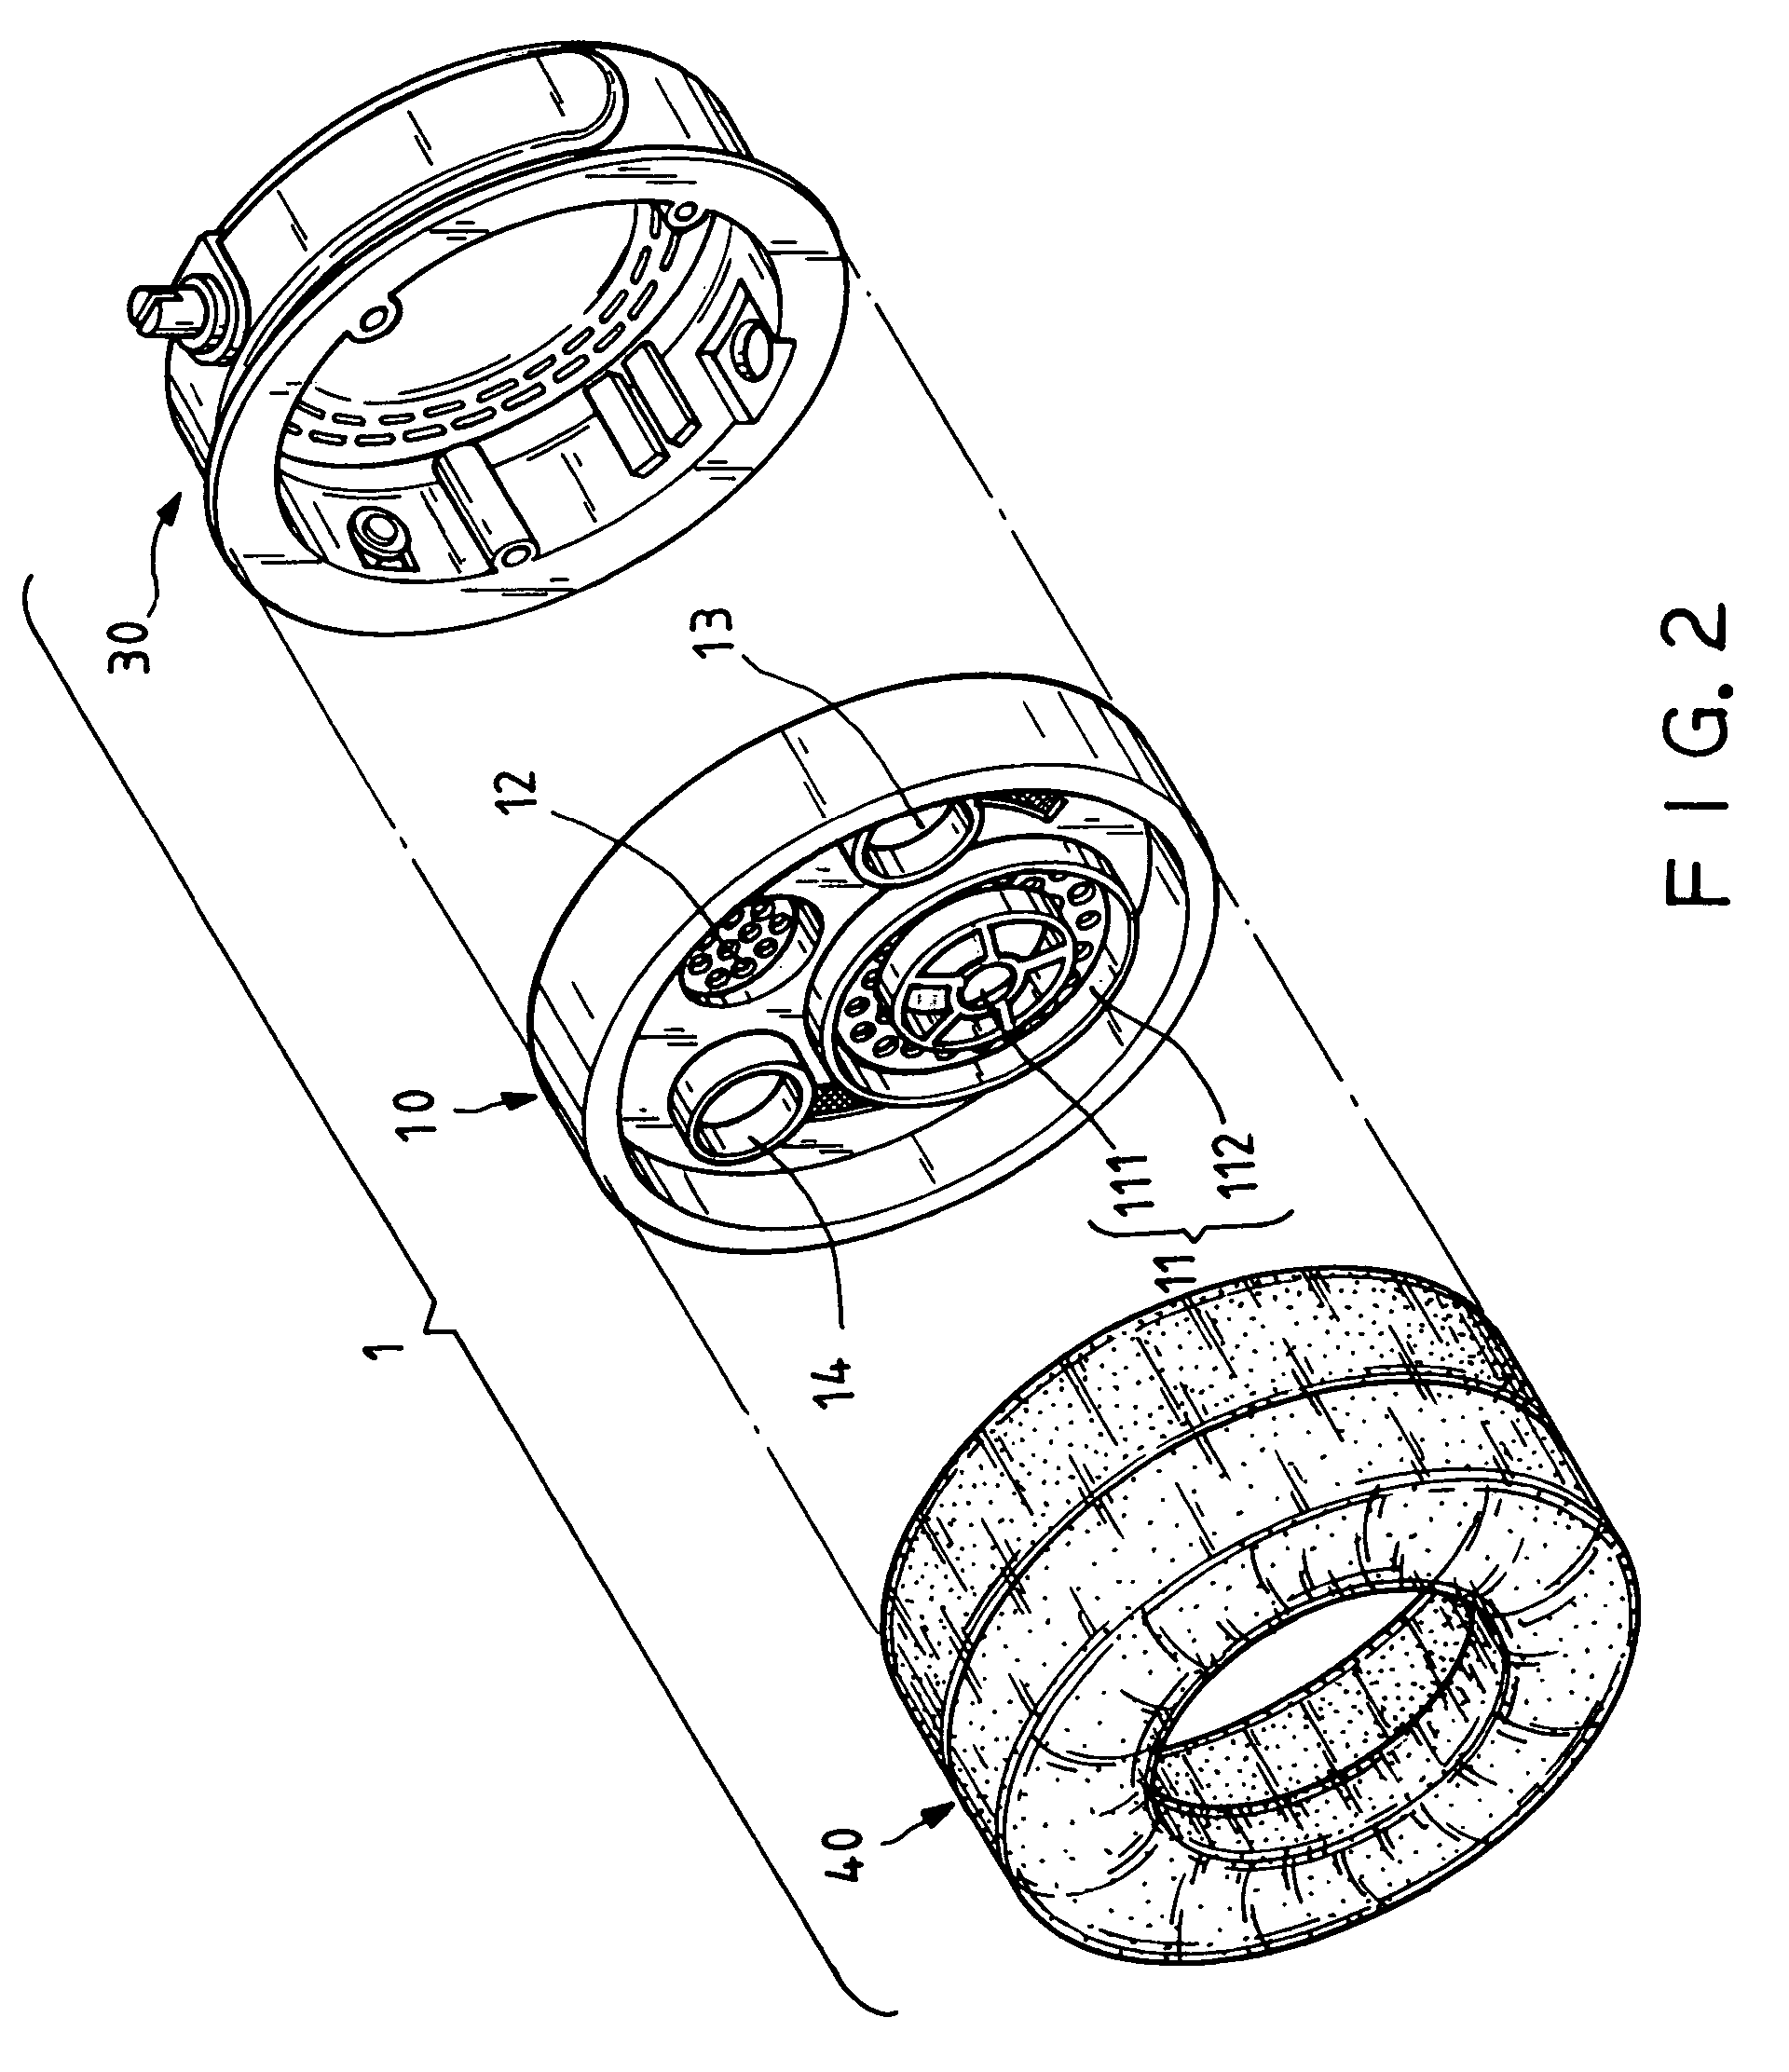 Headphones with a multichannel guiding mechanism